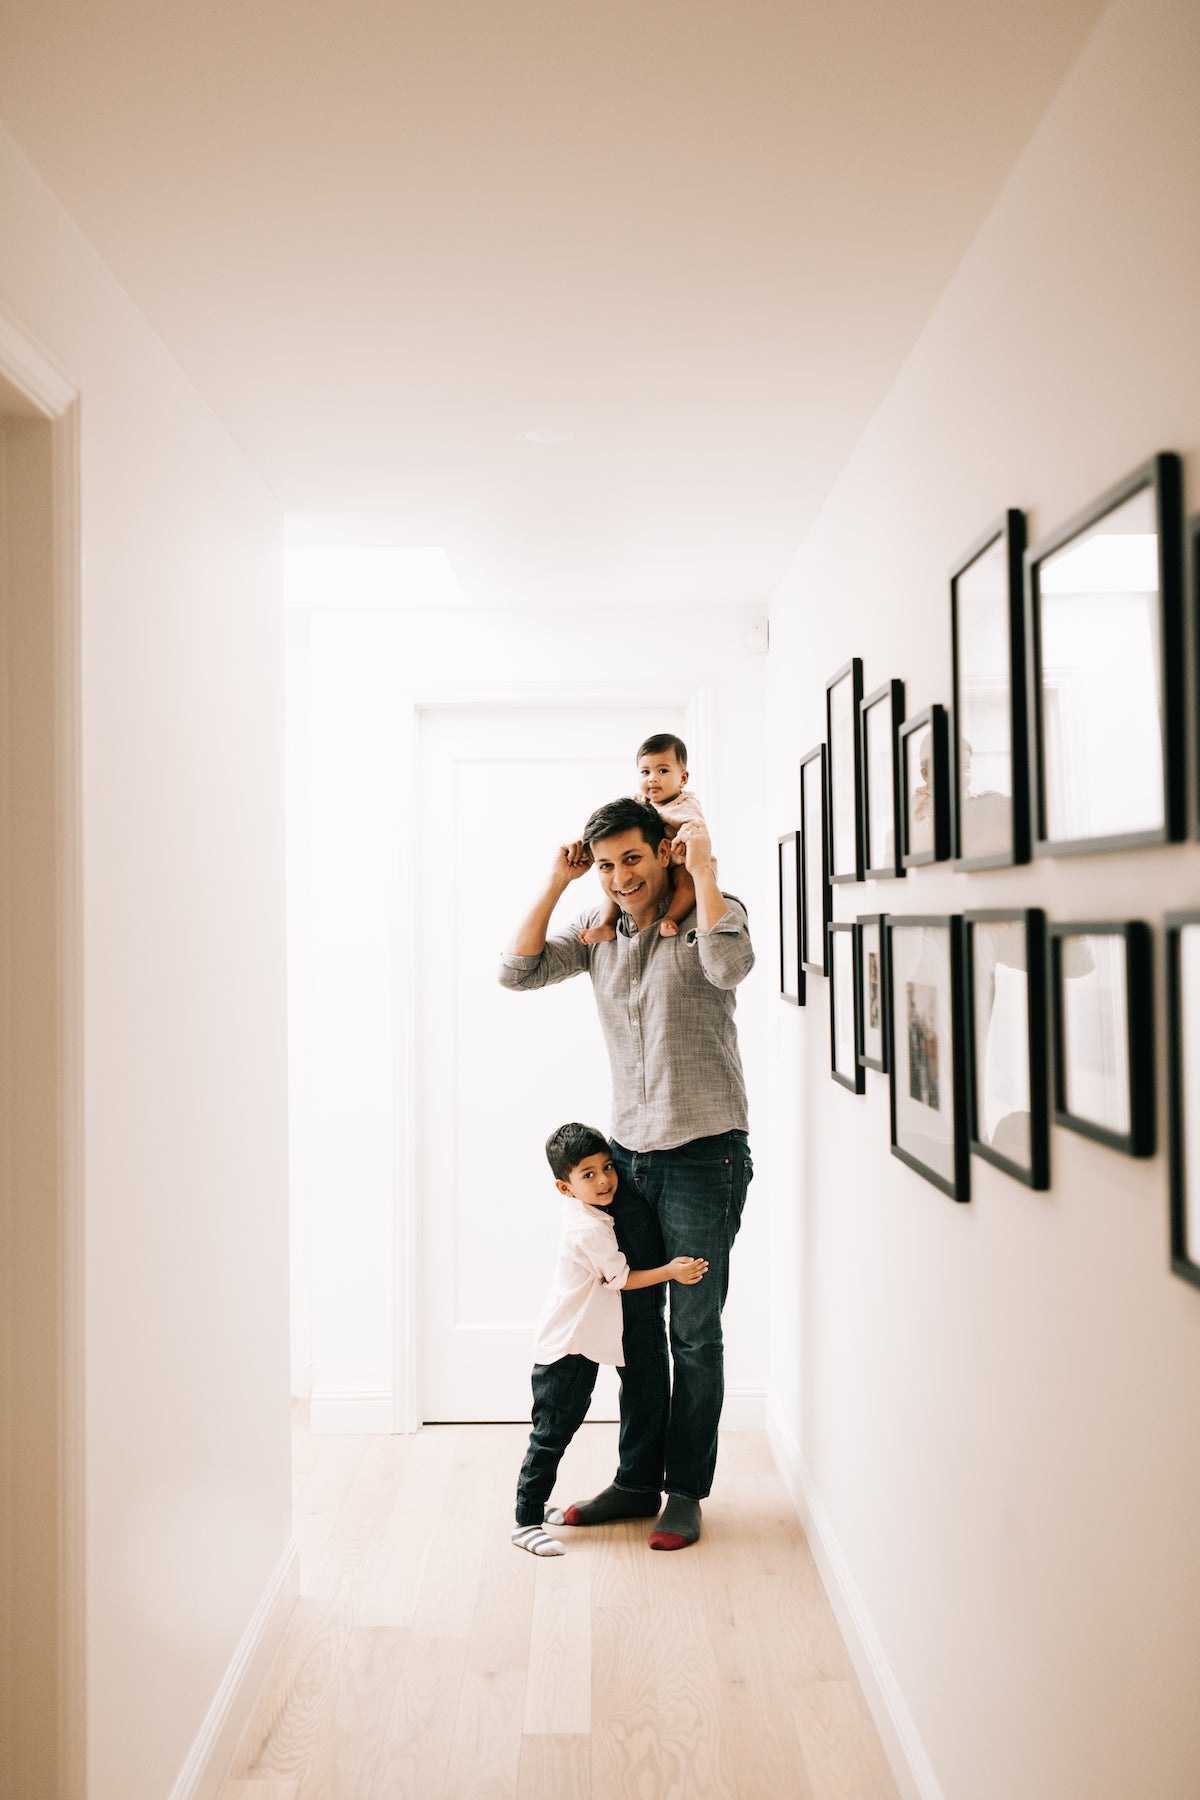 Father with children in brightly lit hallway